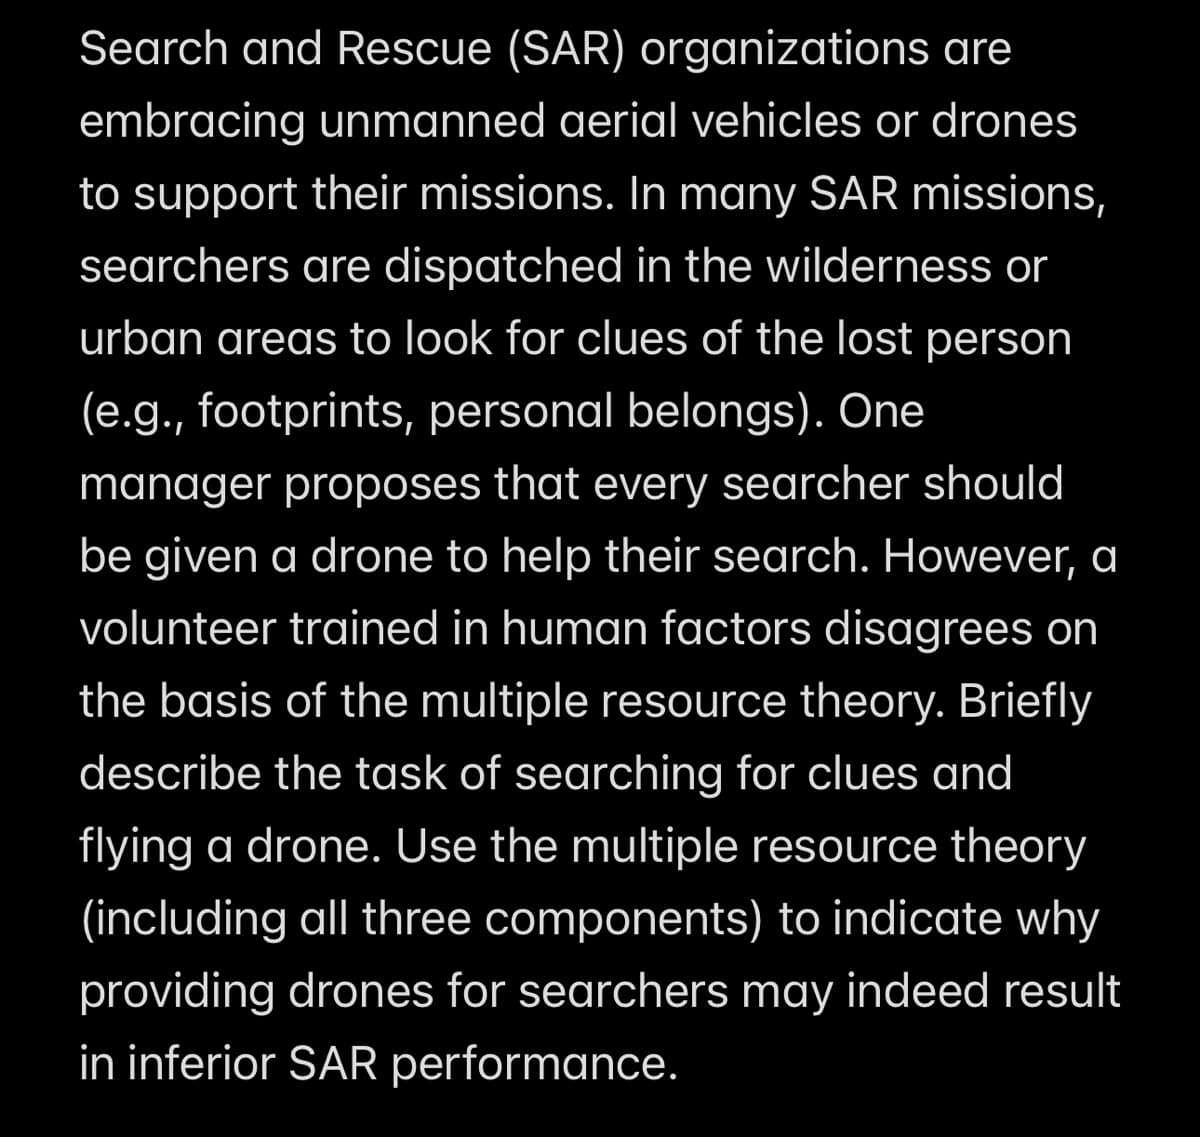 Search and Rescue (SAR) organizations are
embracing unmanned aerial vehicles or drones
to support their missions. In many SAR missions,
searchers are dispatched in the wilderness or
urban areas to look for clues of the lost person
(e.g., footprints, personal belongs). One
manager proposes that every searcher should
be given a drone to help their search. However, a
volunteer trained in human factors disagrees on
the basis of the multiple resource theory. Briefly
describe the task of searching for clues and
flying a drone. Use the multiple resource theory
(including all three components) to indicate why
providing drones for searchers may indeed result
in inferior SAR performance.